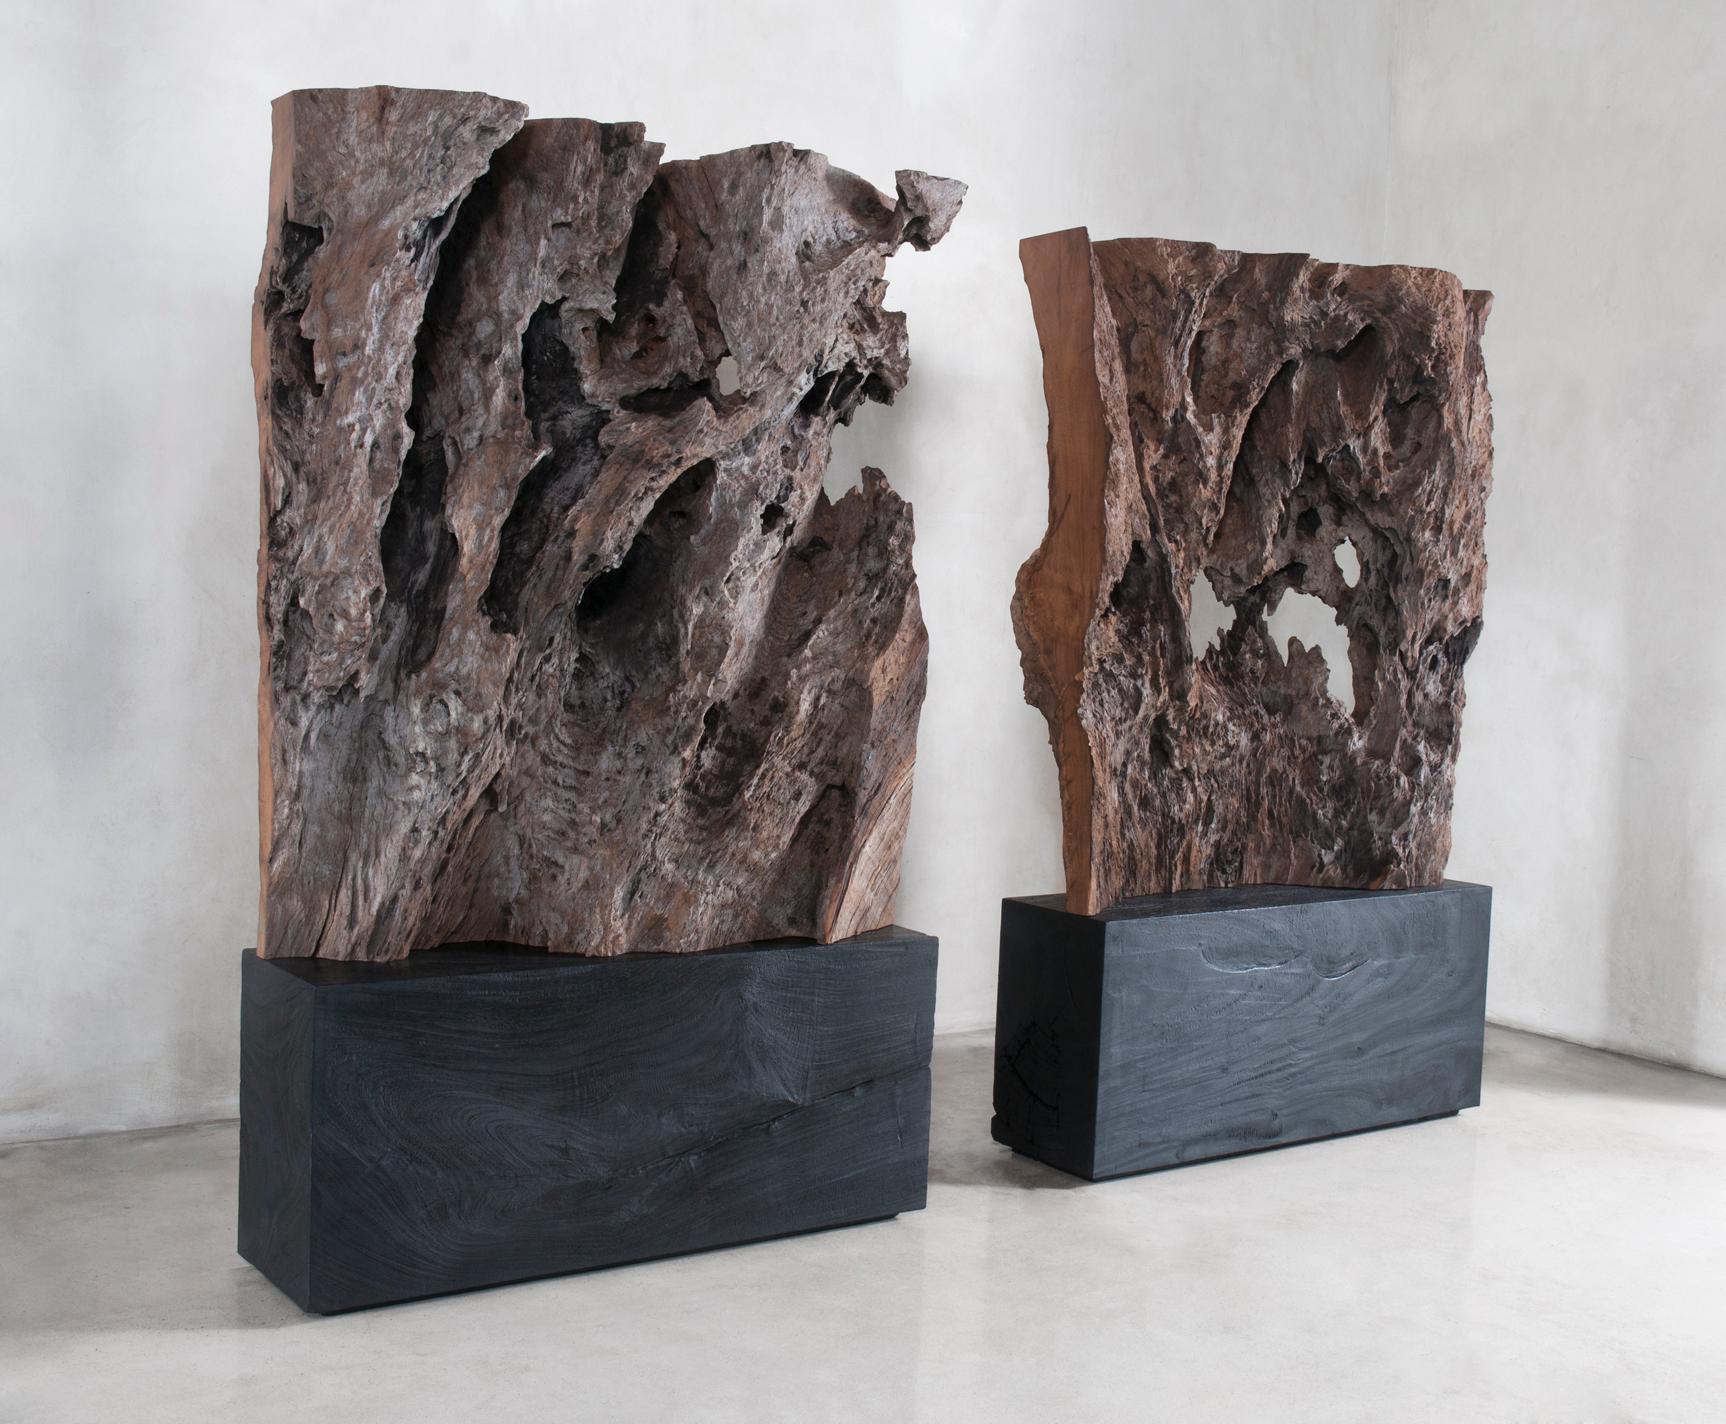 Impressive pair of highly tactile ironwood sculptures. The craggy formation of reclaimed ironwood ensures dramatic visual impact. Each is signed with the artist's monogram 'JAS' and is supported by blackened Suar wood plinths.

Jérome Abel Seguin